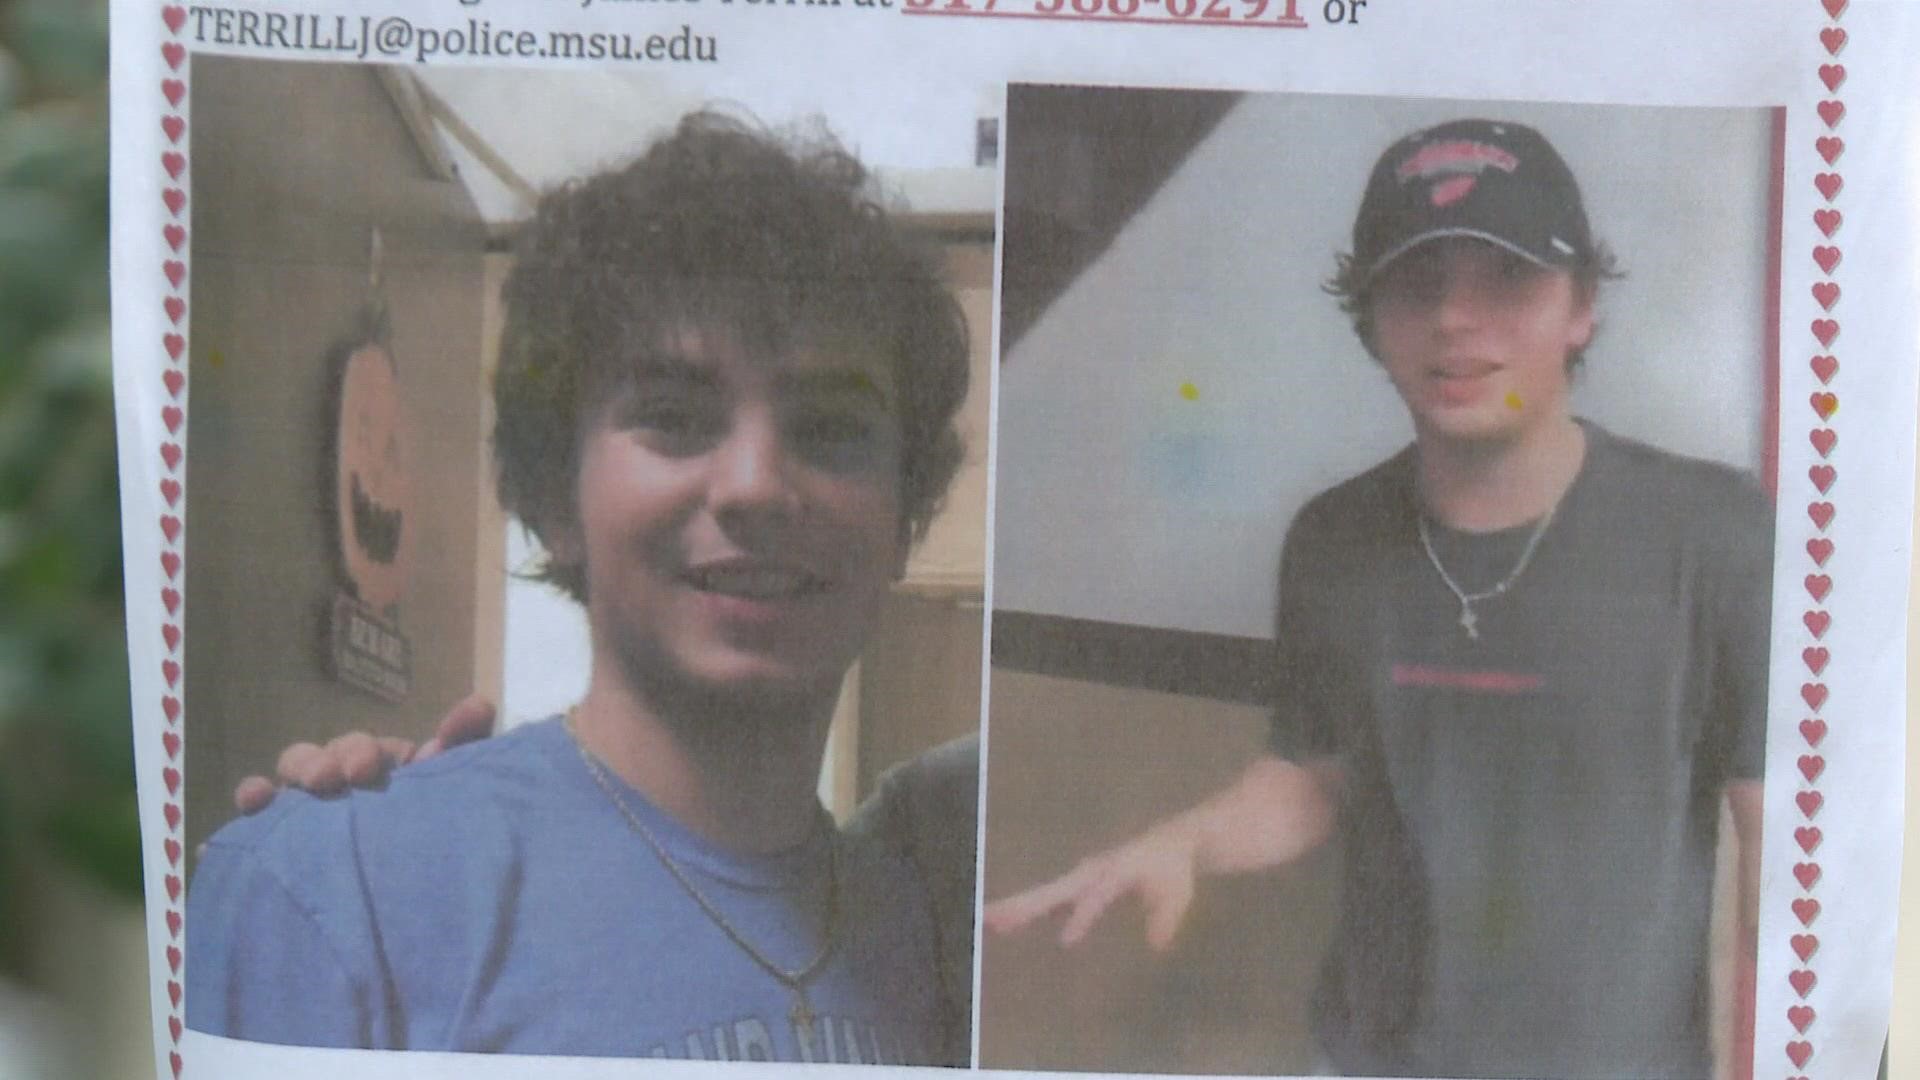 Santo was last seen walking on campus and police say there is no indication he left the East Lansing area.